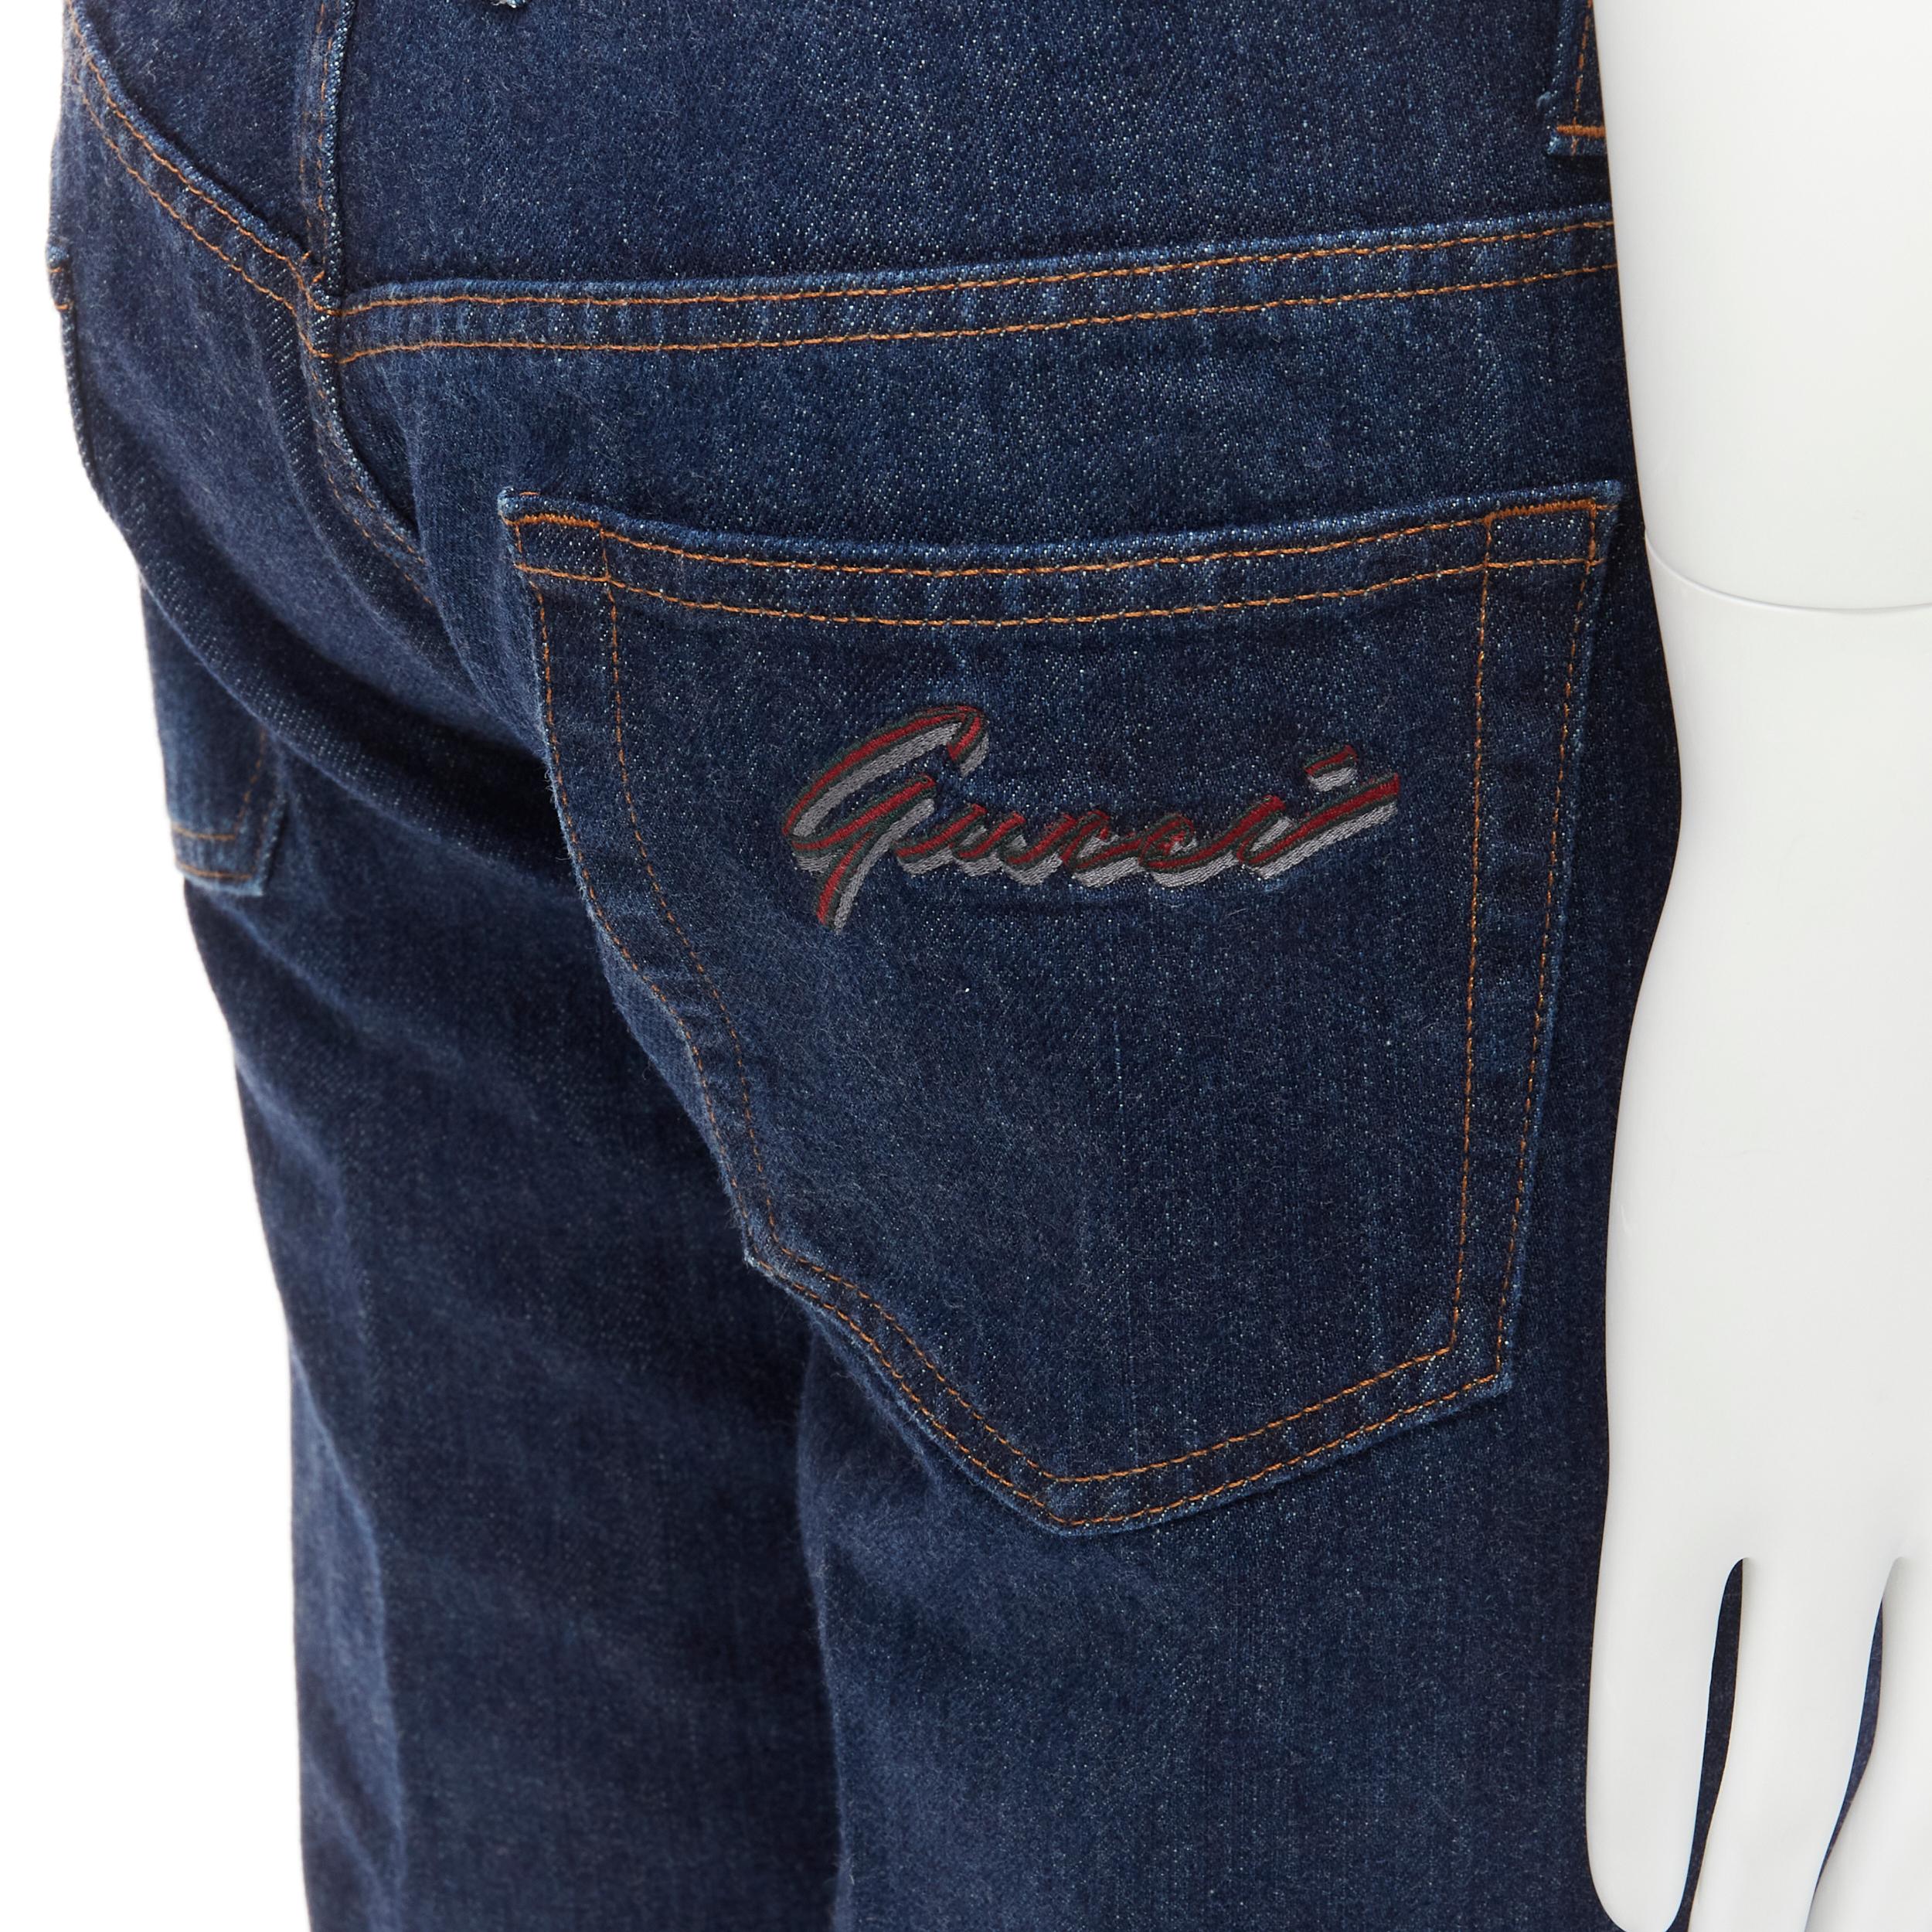 GUCCI Tom Ford Vintage GG Cursive logo embroidered blue jeans IT48 M
Reference: KELE/A00021
Brand: Gucci
Designer: Tom Ford
Material: Denim
Color: Blue
Pattern: Solid
Closure: Zip Fly
Extra Details: GUCCI cursive logo at right back pocket.
Made in: